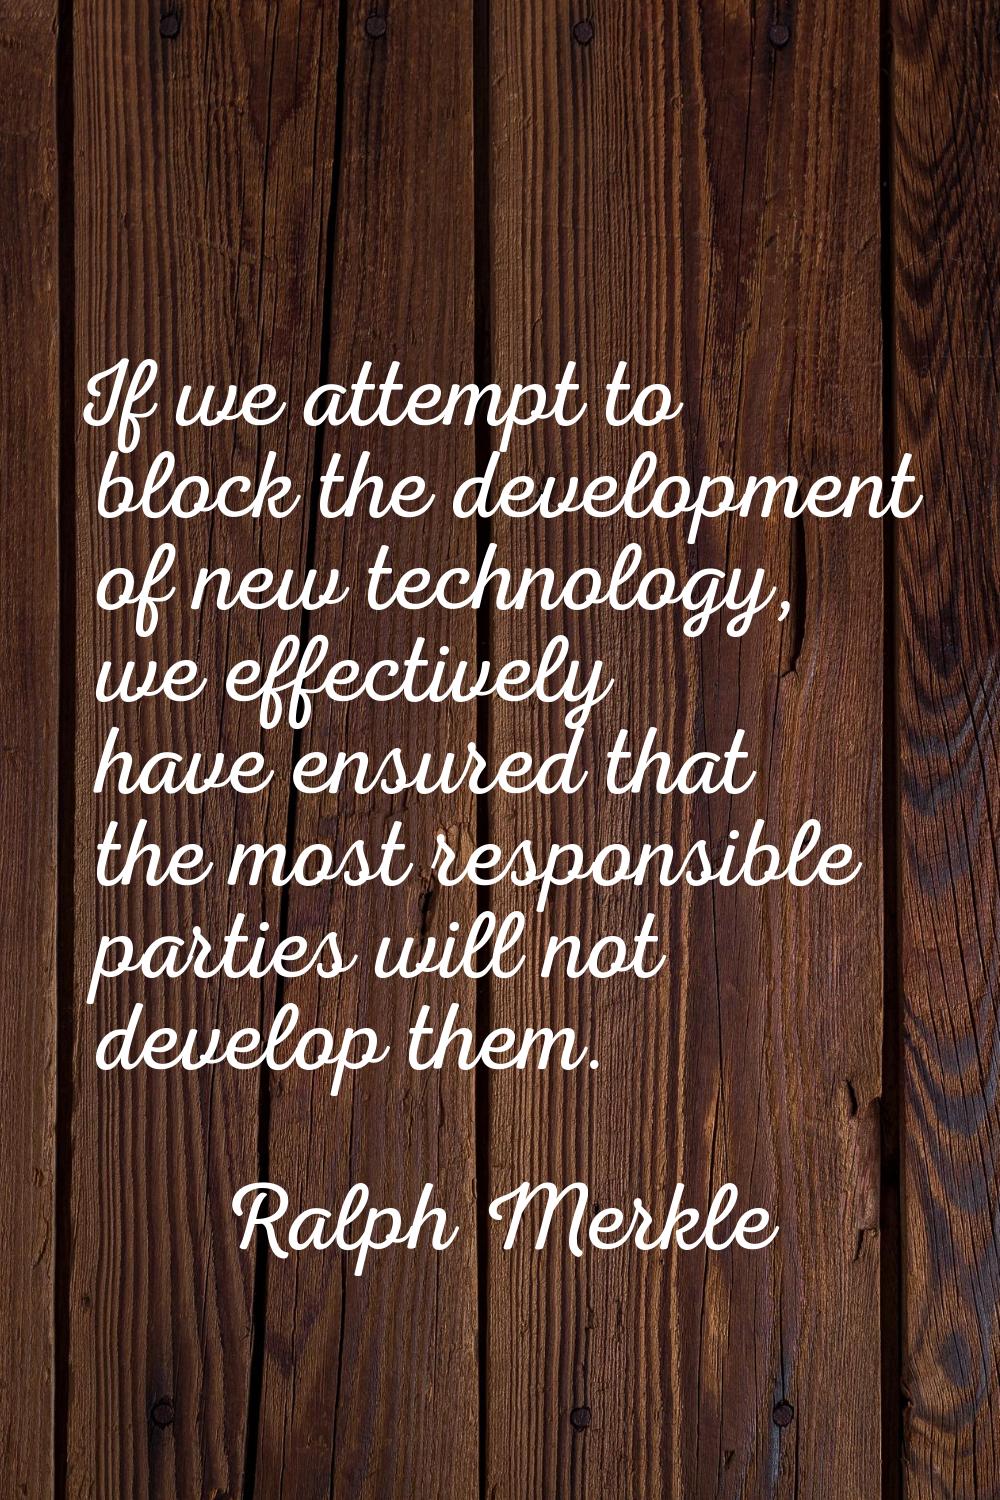 If we attempt to block the development of new technology, we effectively have ensured that the most